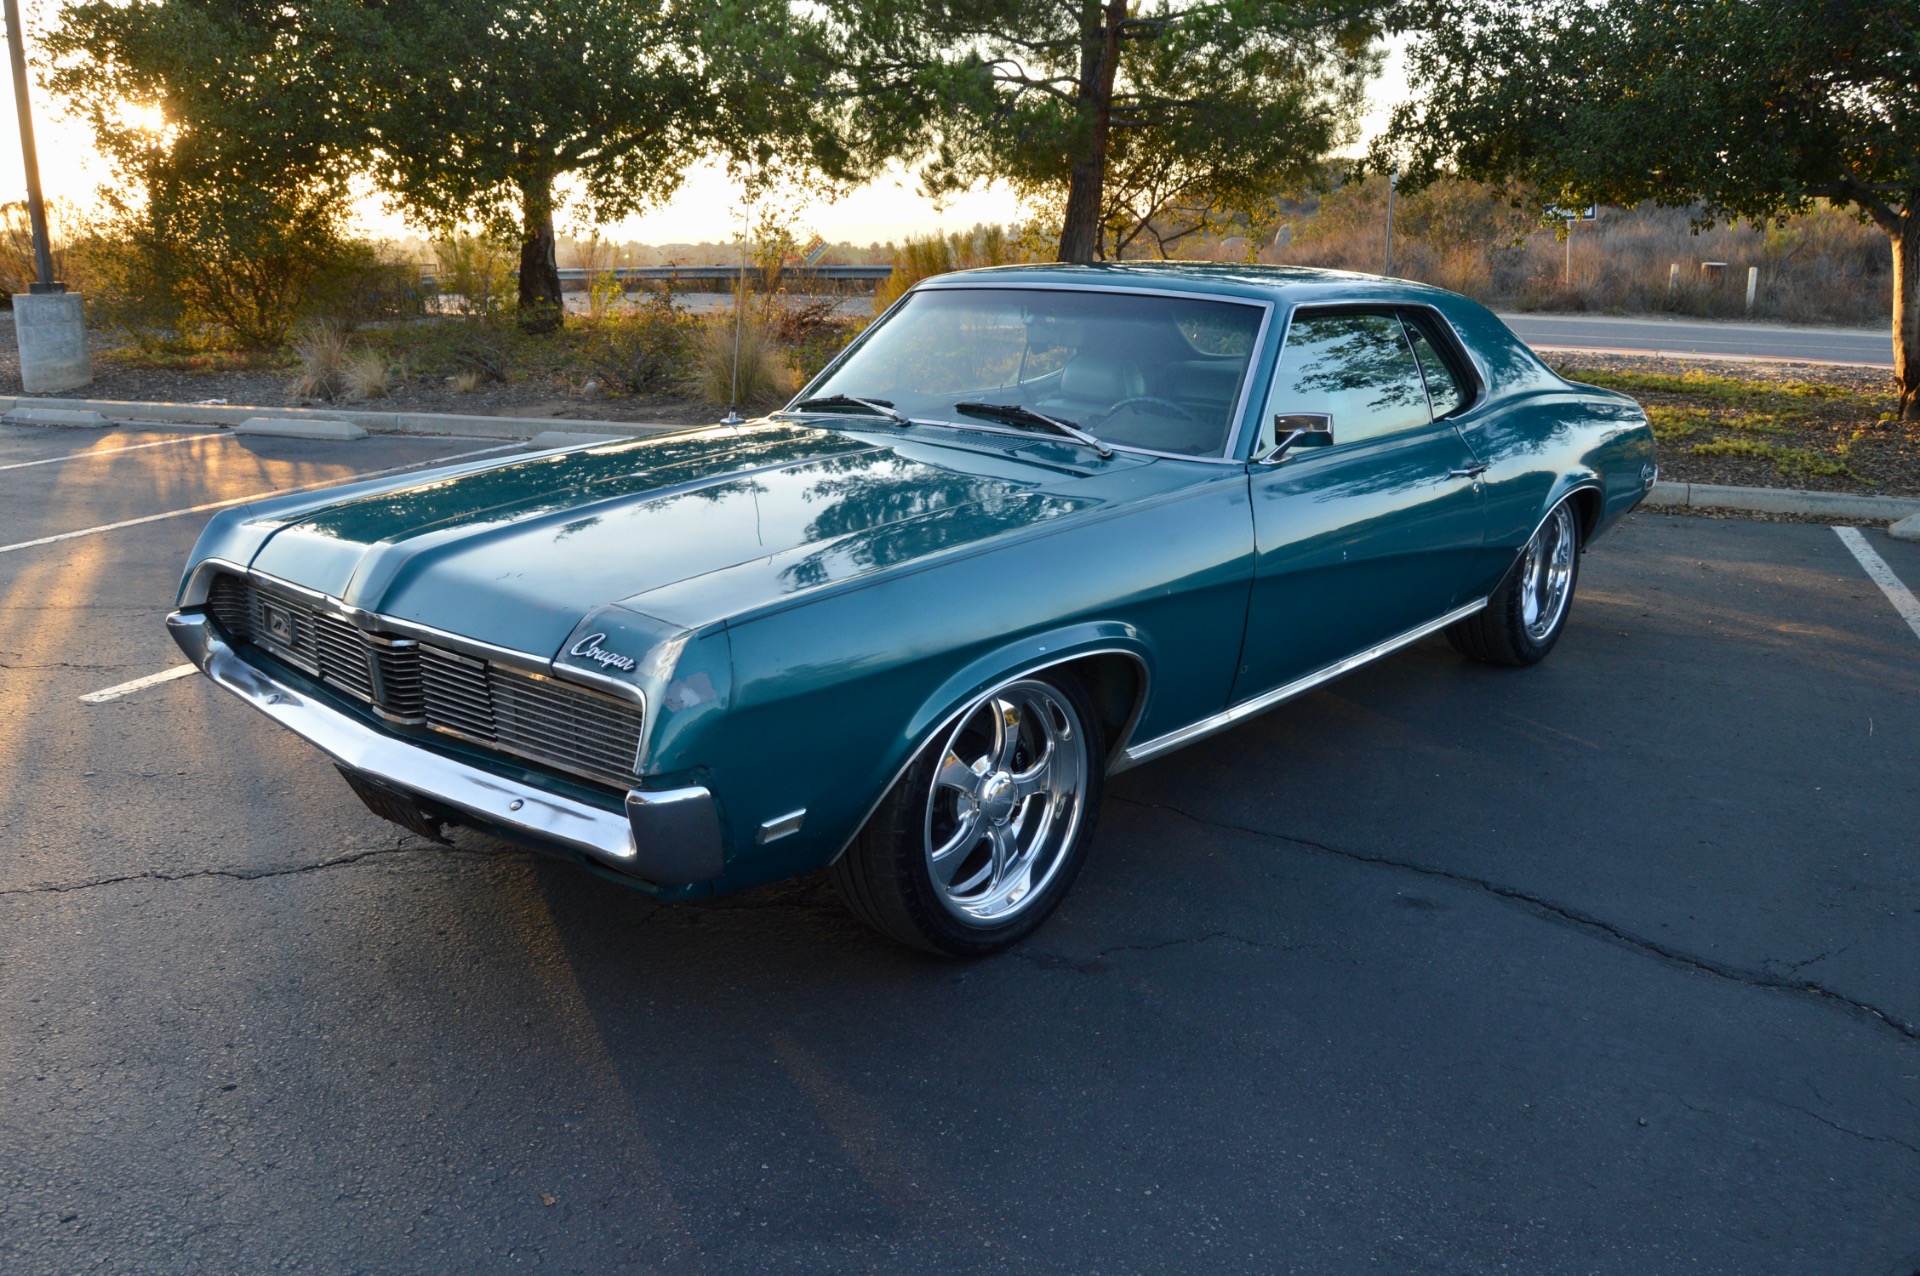 Used 1969 Mercury Cougar For Sale ($22,500) | Affordable Classics San Diego  Stock #354